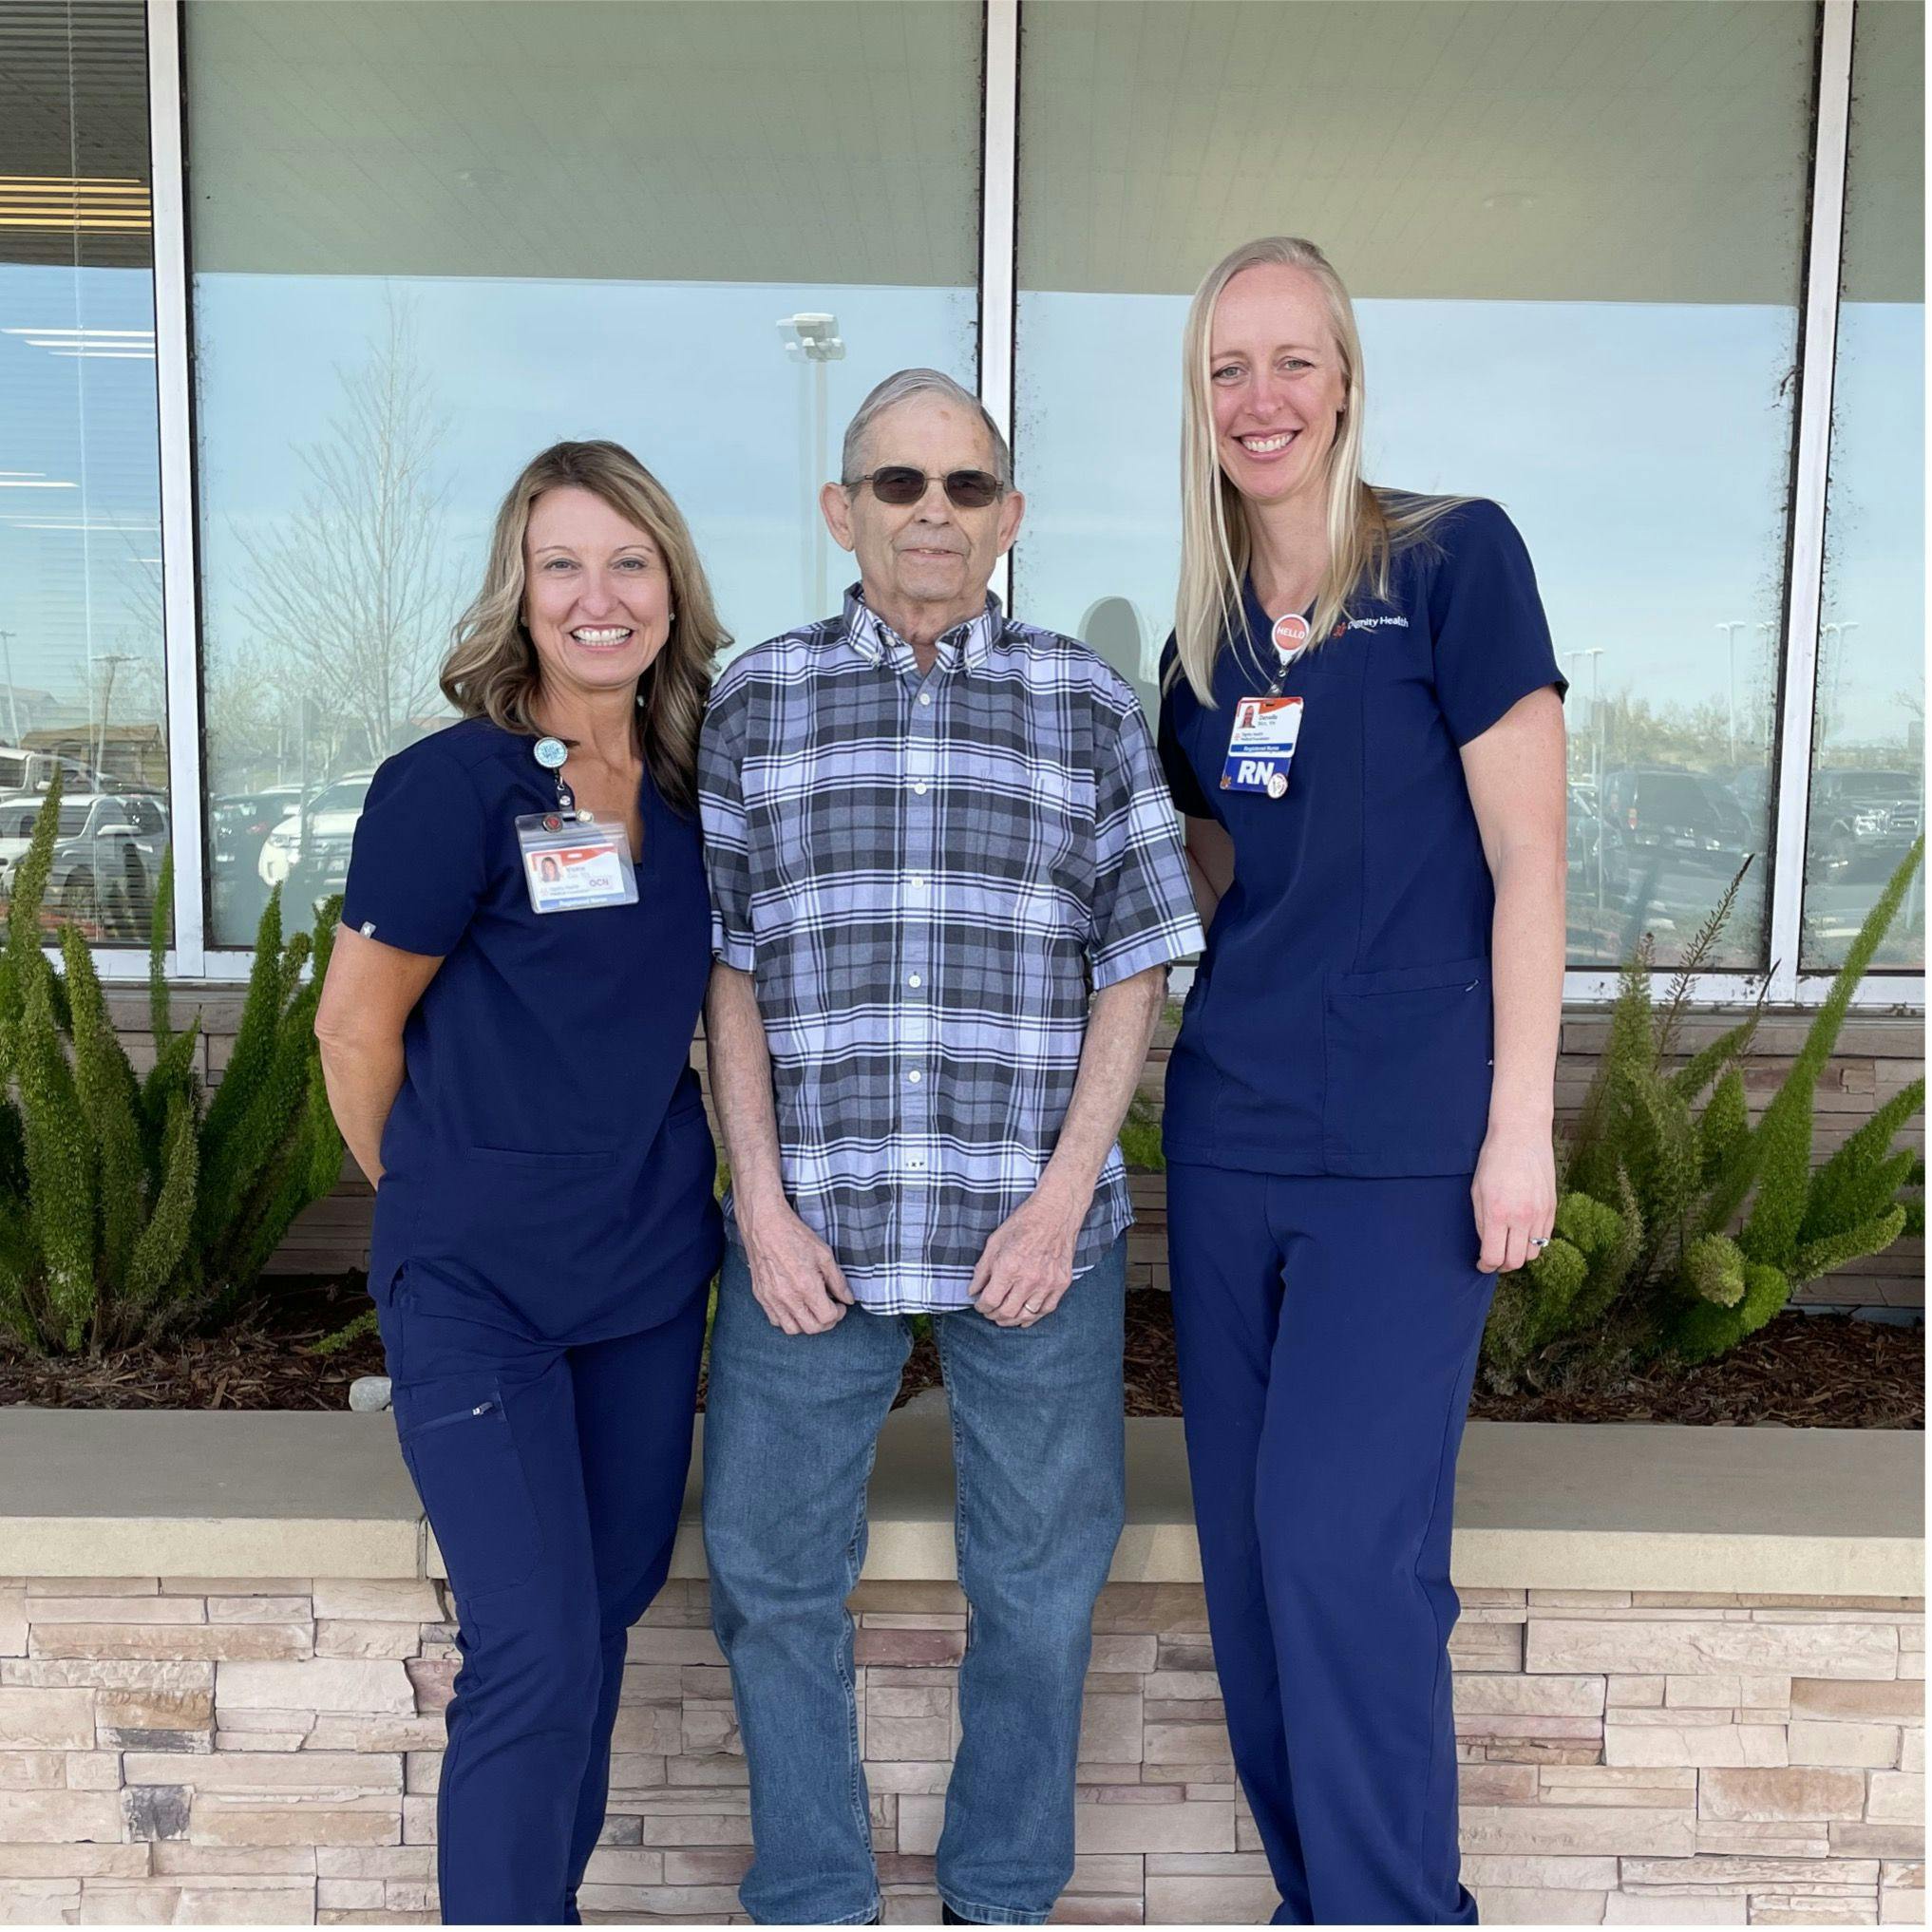 From left: VICKIE COX, RN, OCN; HOWARD CAMPBELL; and DANIELLE MICK, B.S.N., RN

PHOTO BY CASEY LANG